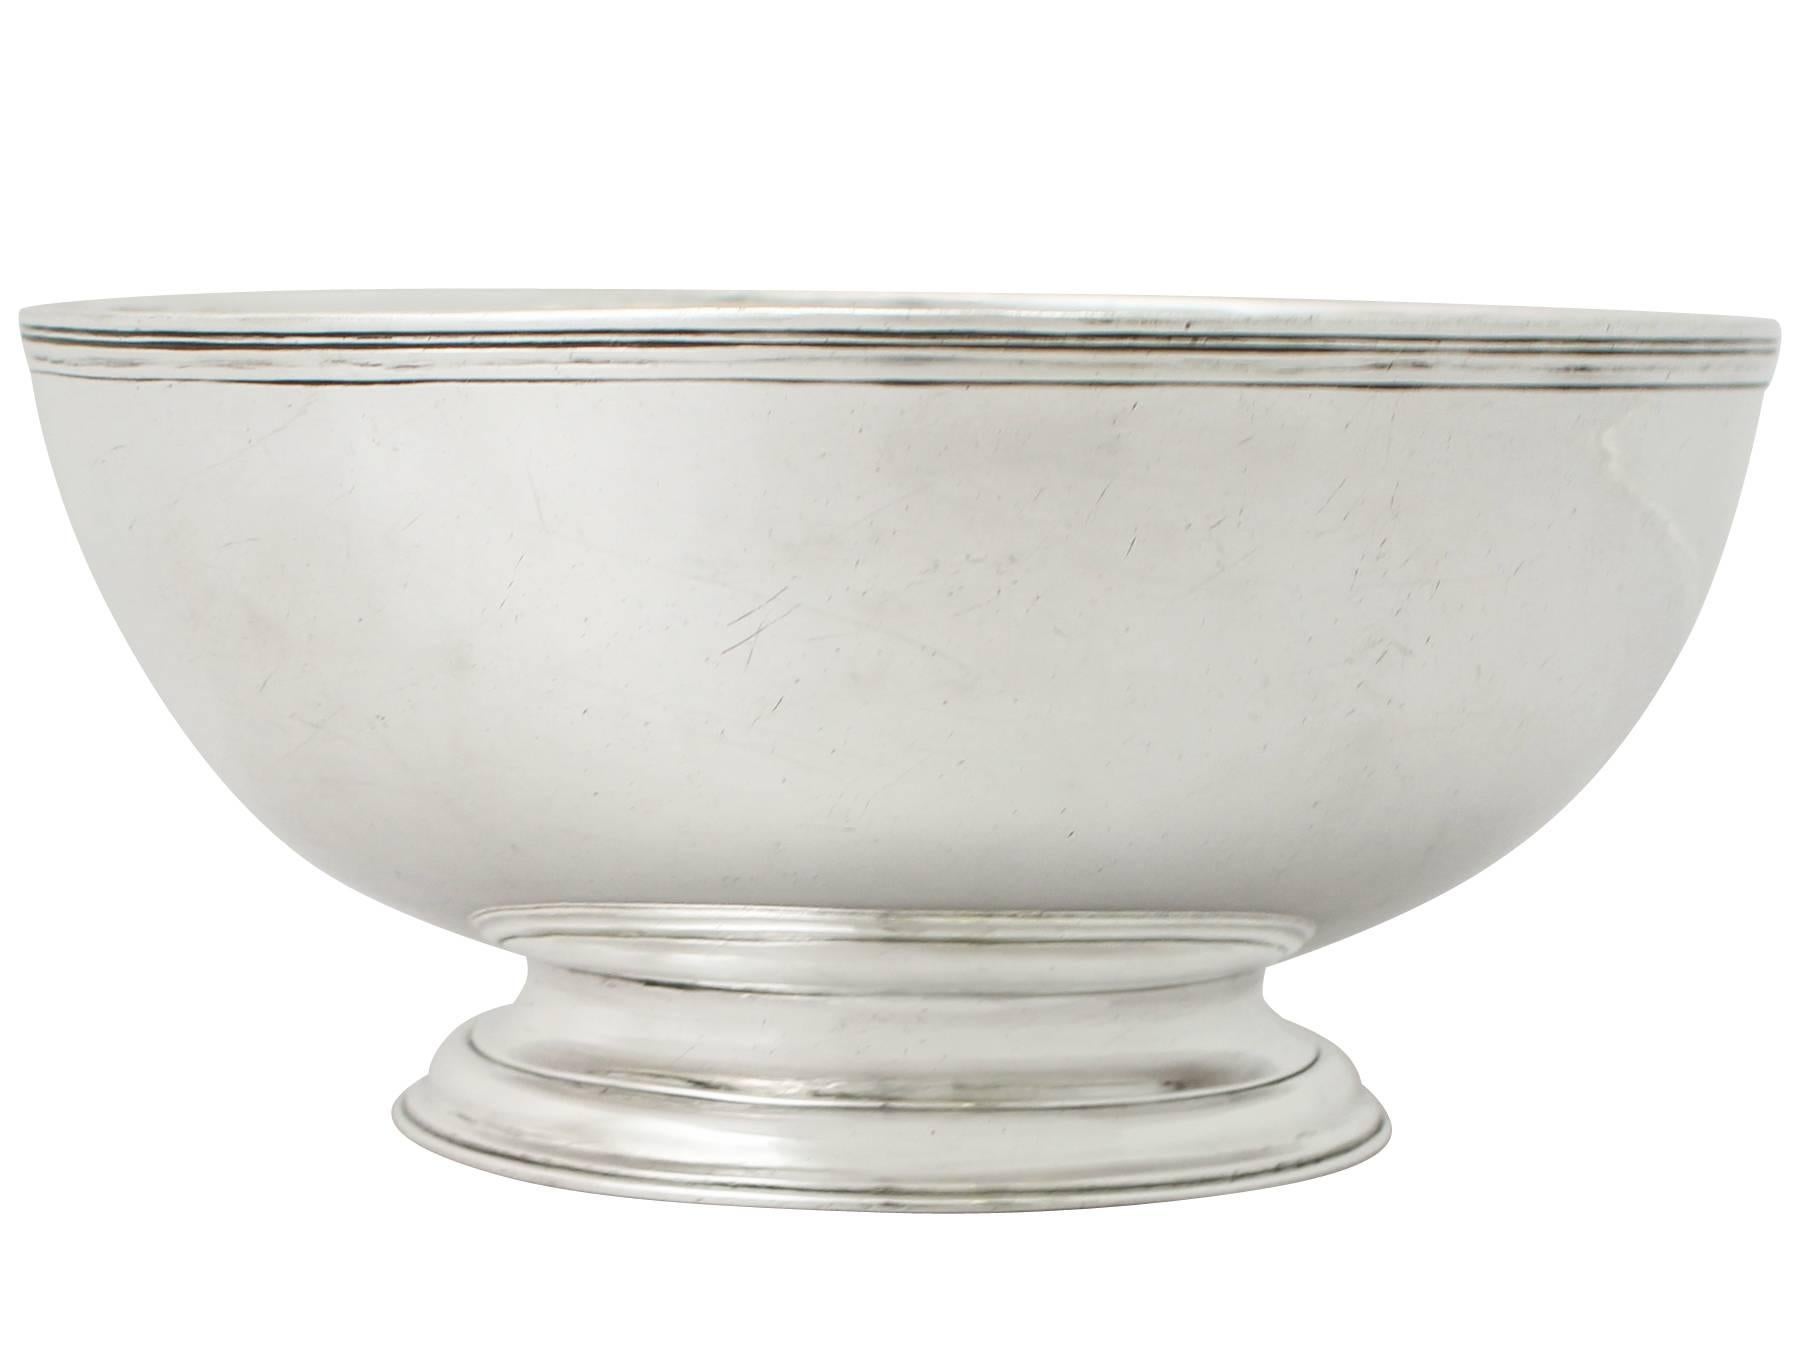 An exceptional, fine and impressive antique George I English sterling silver bowl; an addition to our Georgian silverware collection.

This exceptional antique Georgian sterling silver bowl has a classic George I, plain circular rounded form onto